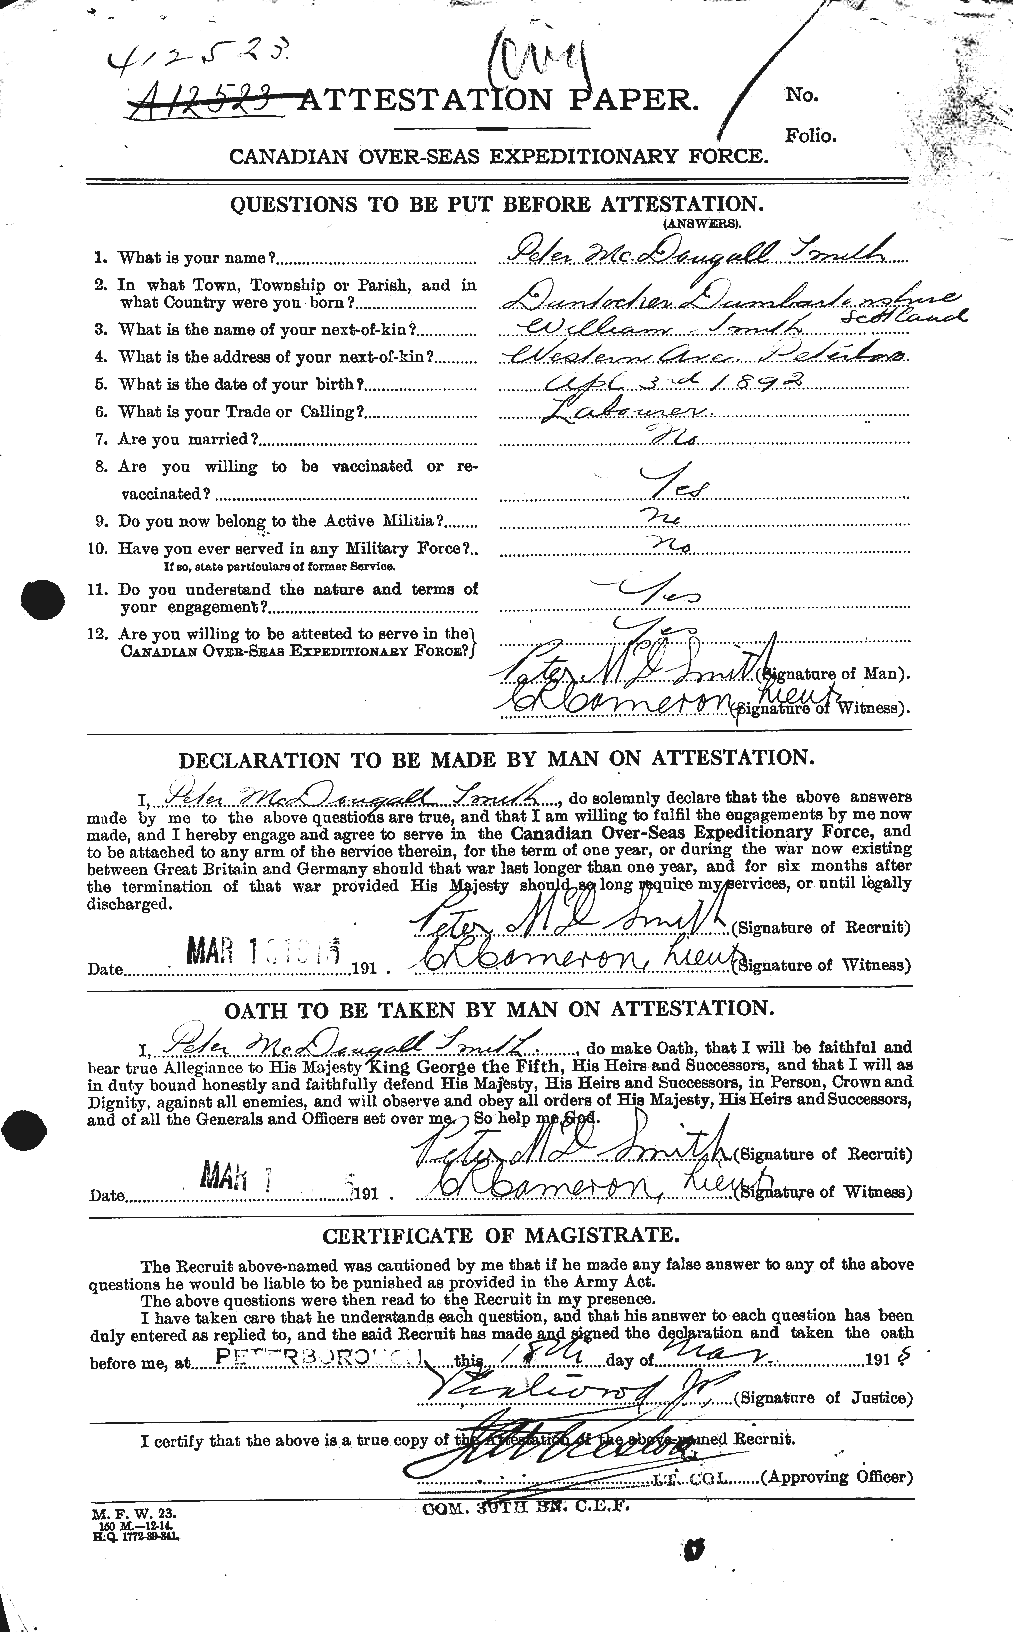 Personnel Records of the First World War - CEF 622231a